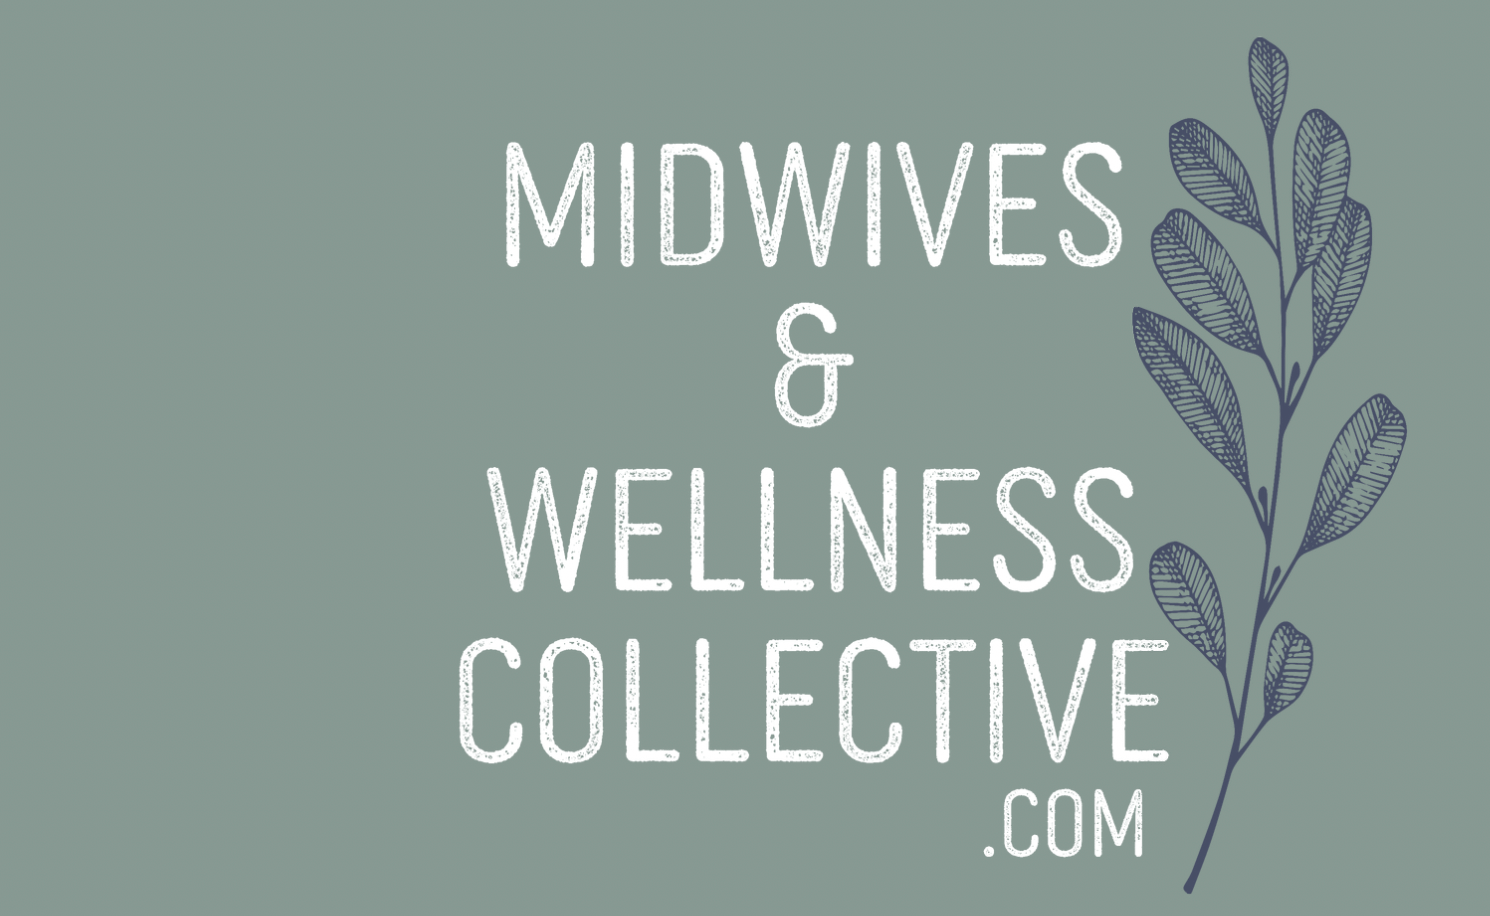 Midwives and Wellness Collective image